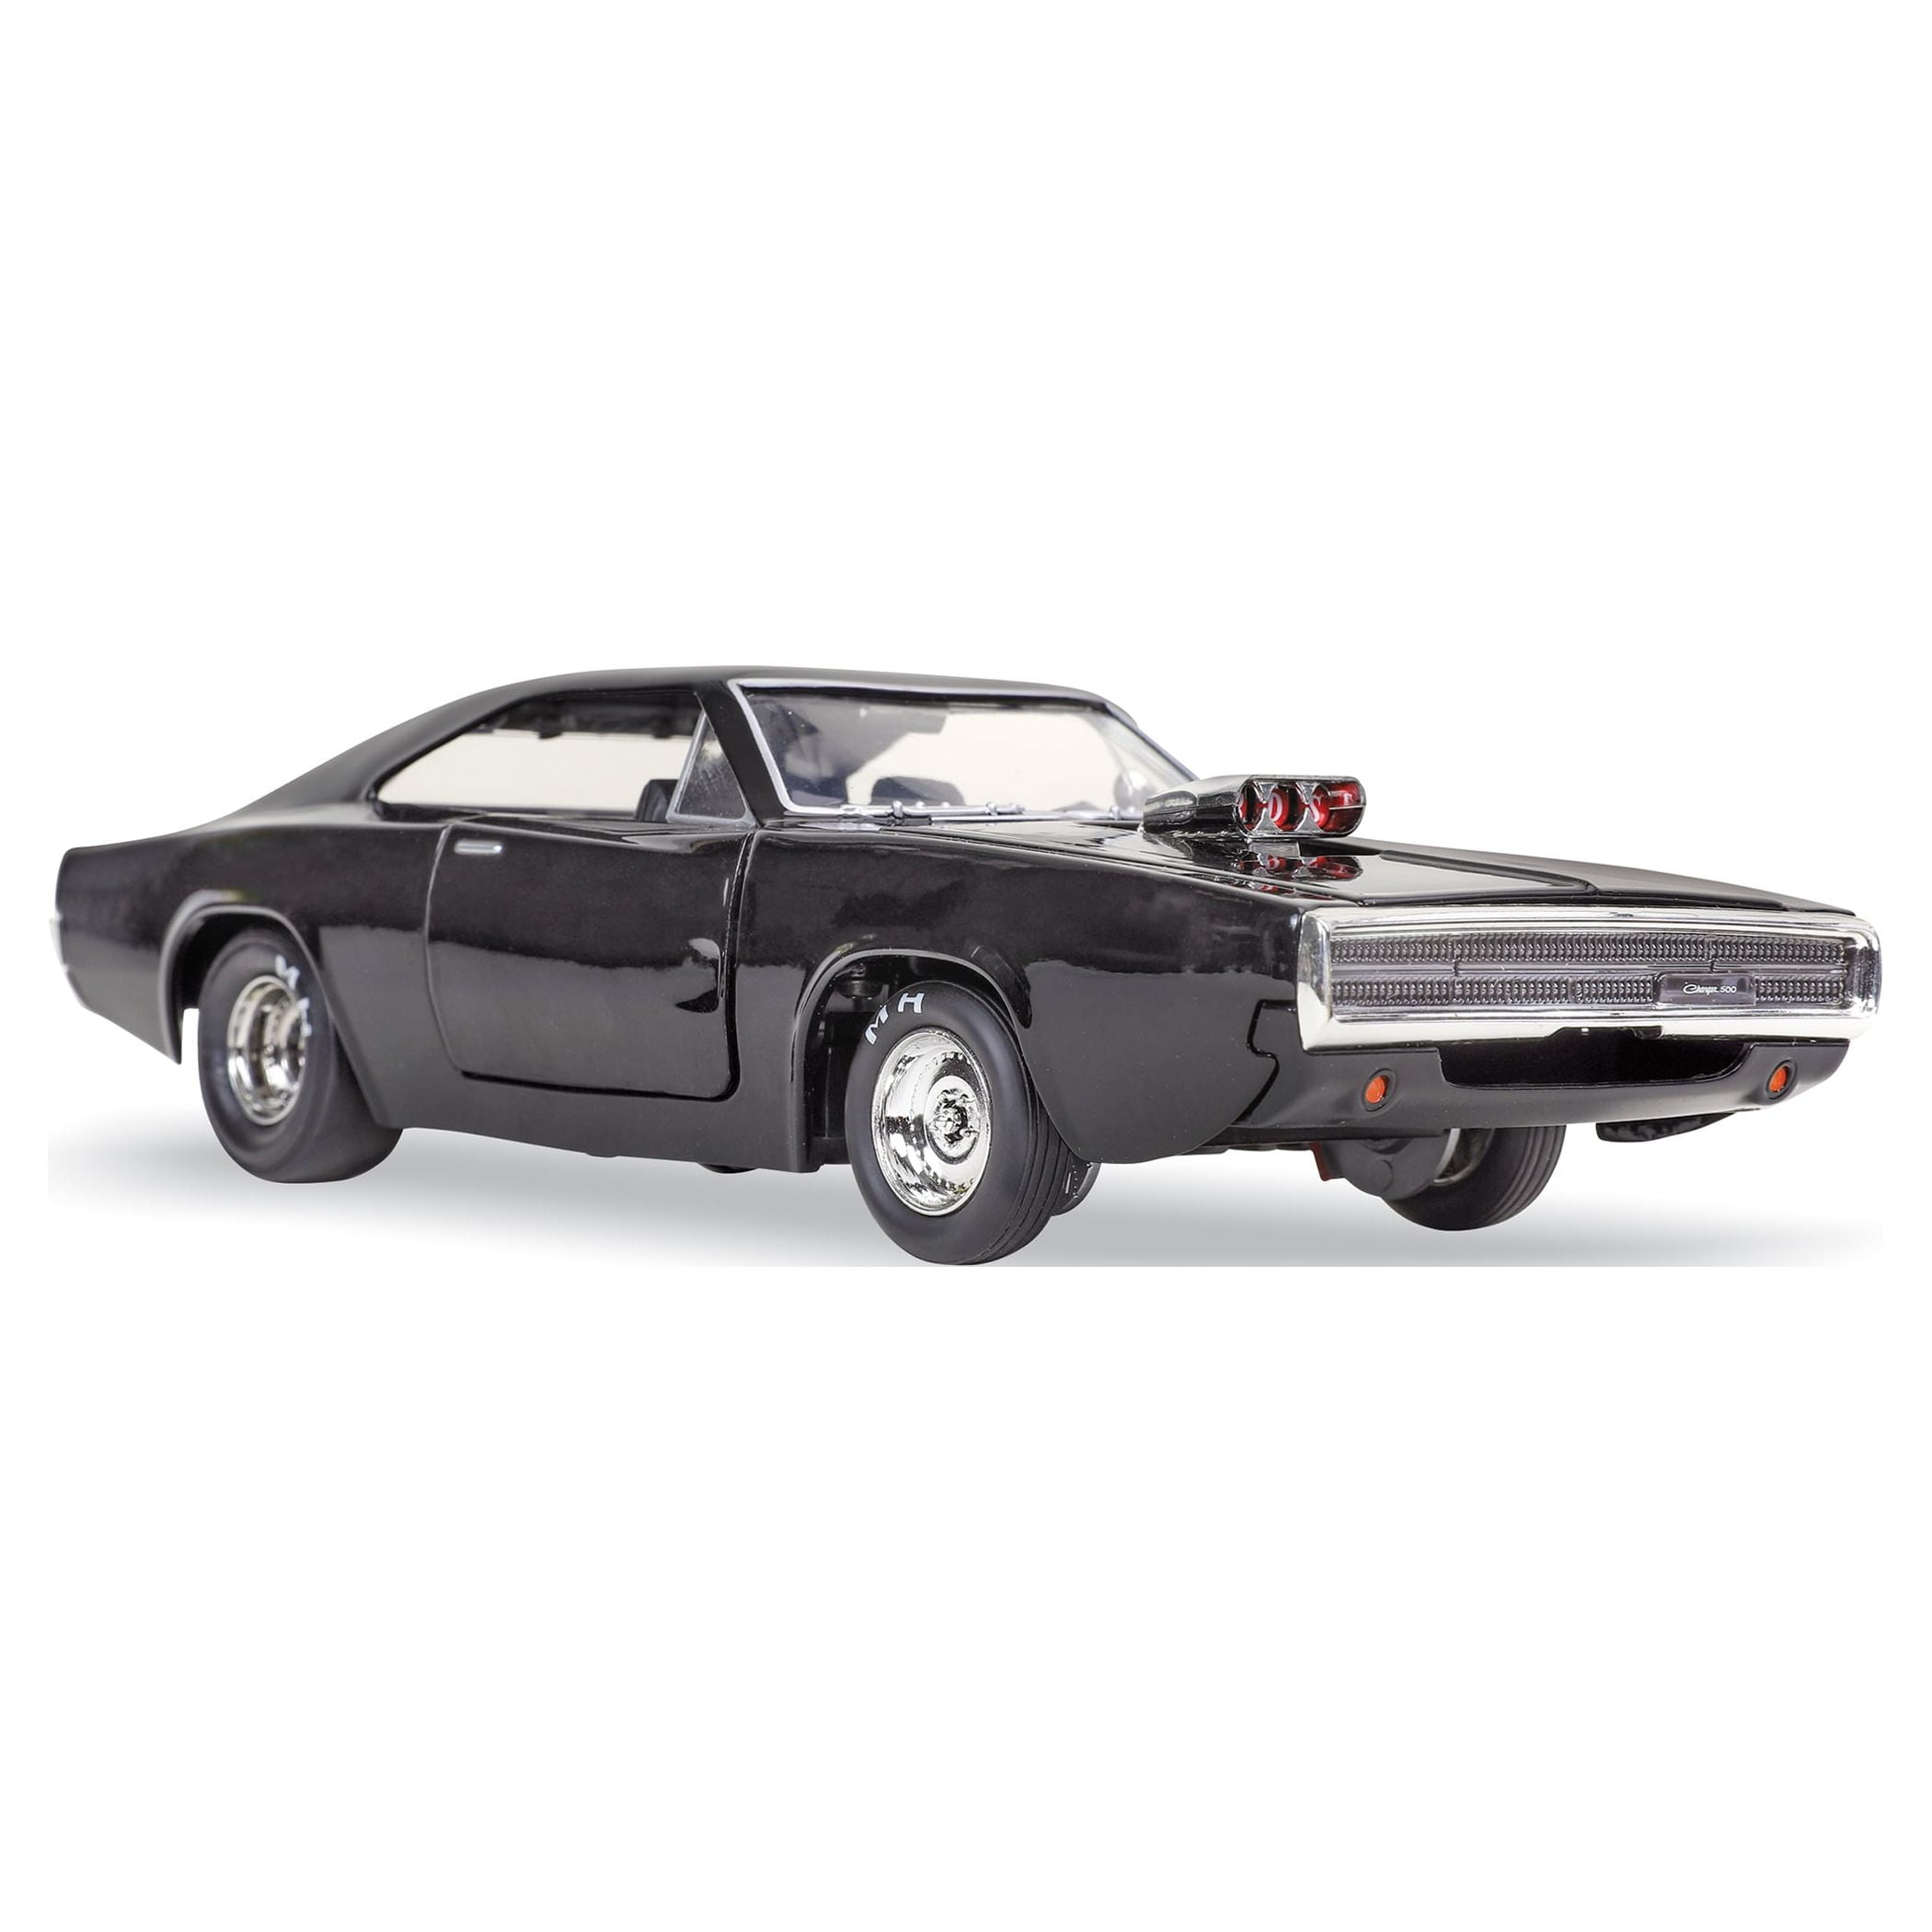 Picture of Jada 31942 1-24 Diecast Model Car for Doms 1970 Dodge Charger 500 Black Fast & Furious 9 F9 2021 Movie